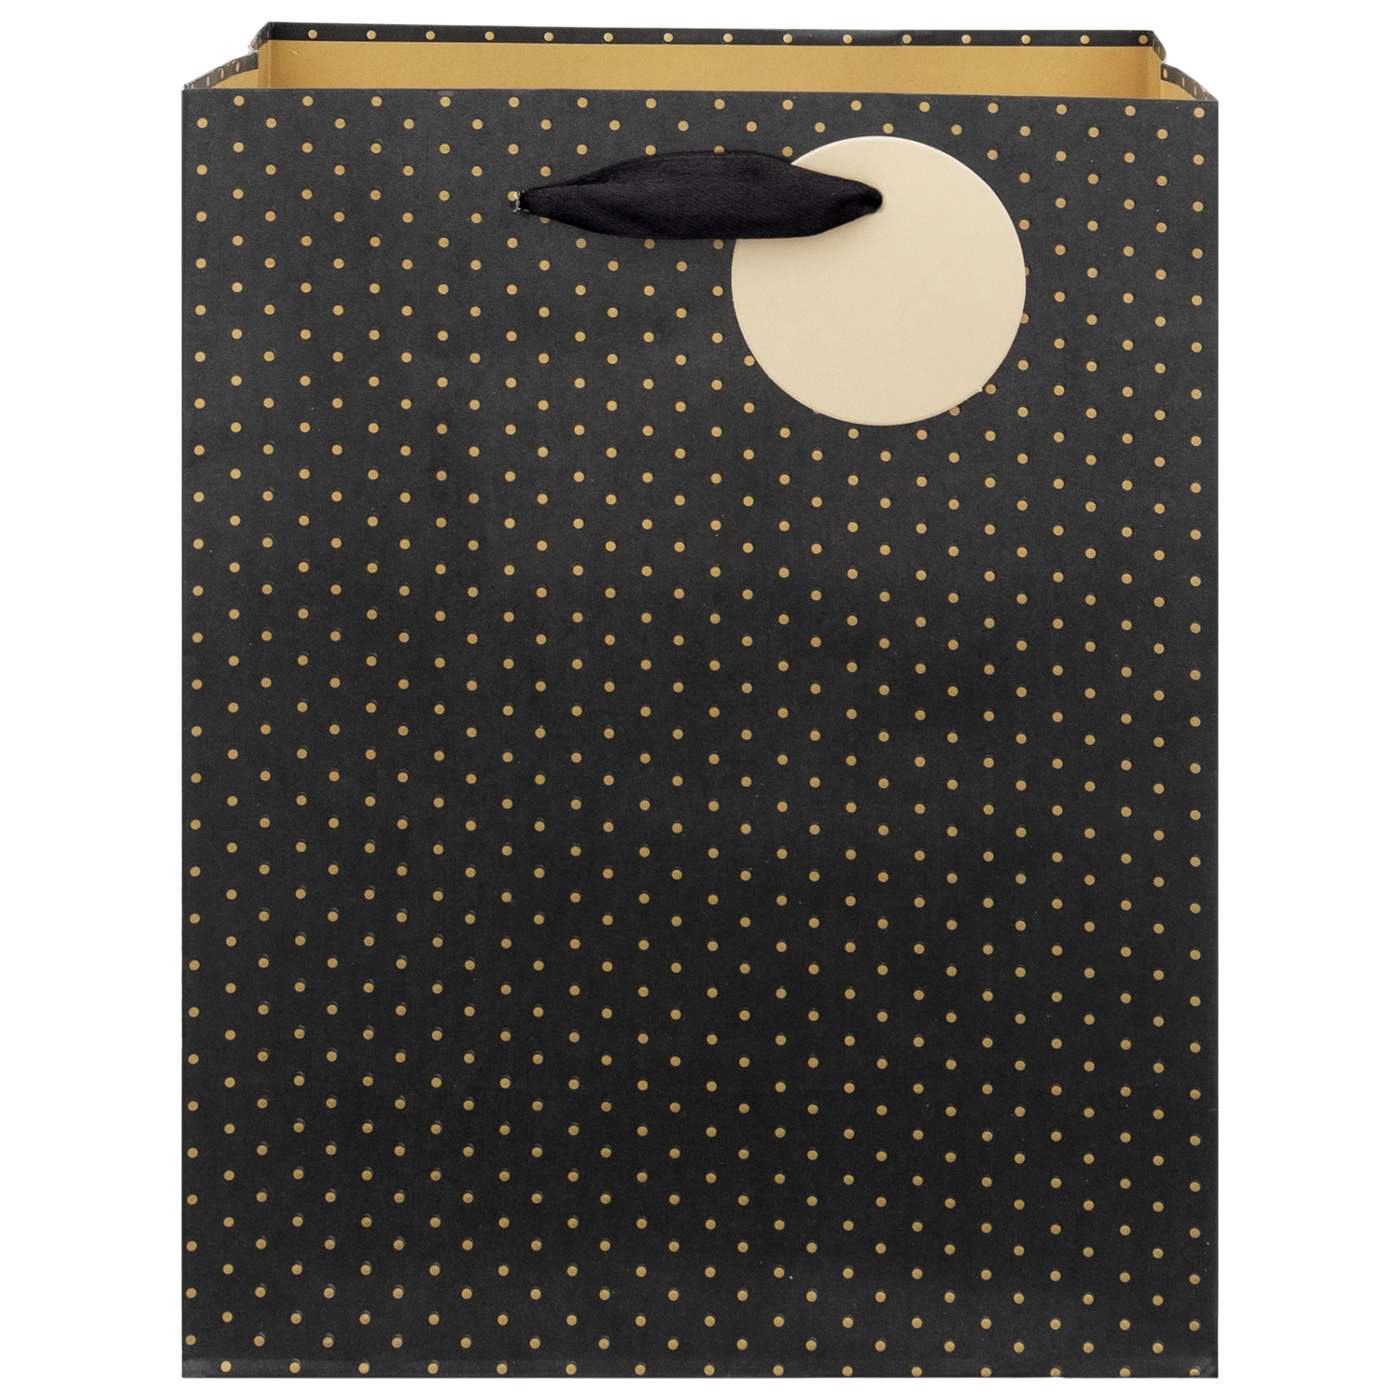 ECOHOLA Black and Gold Foil Paper Gift Bags with Black Handles, 25 Pieces  Metallic Gold Foil Polka Dot for Presents, Retails, Christmas or New Year